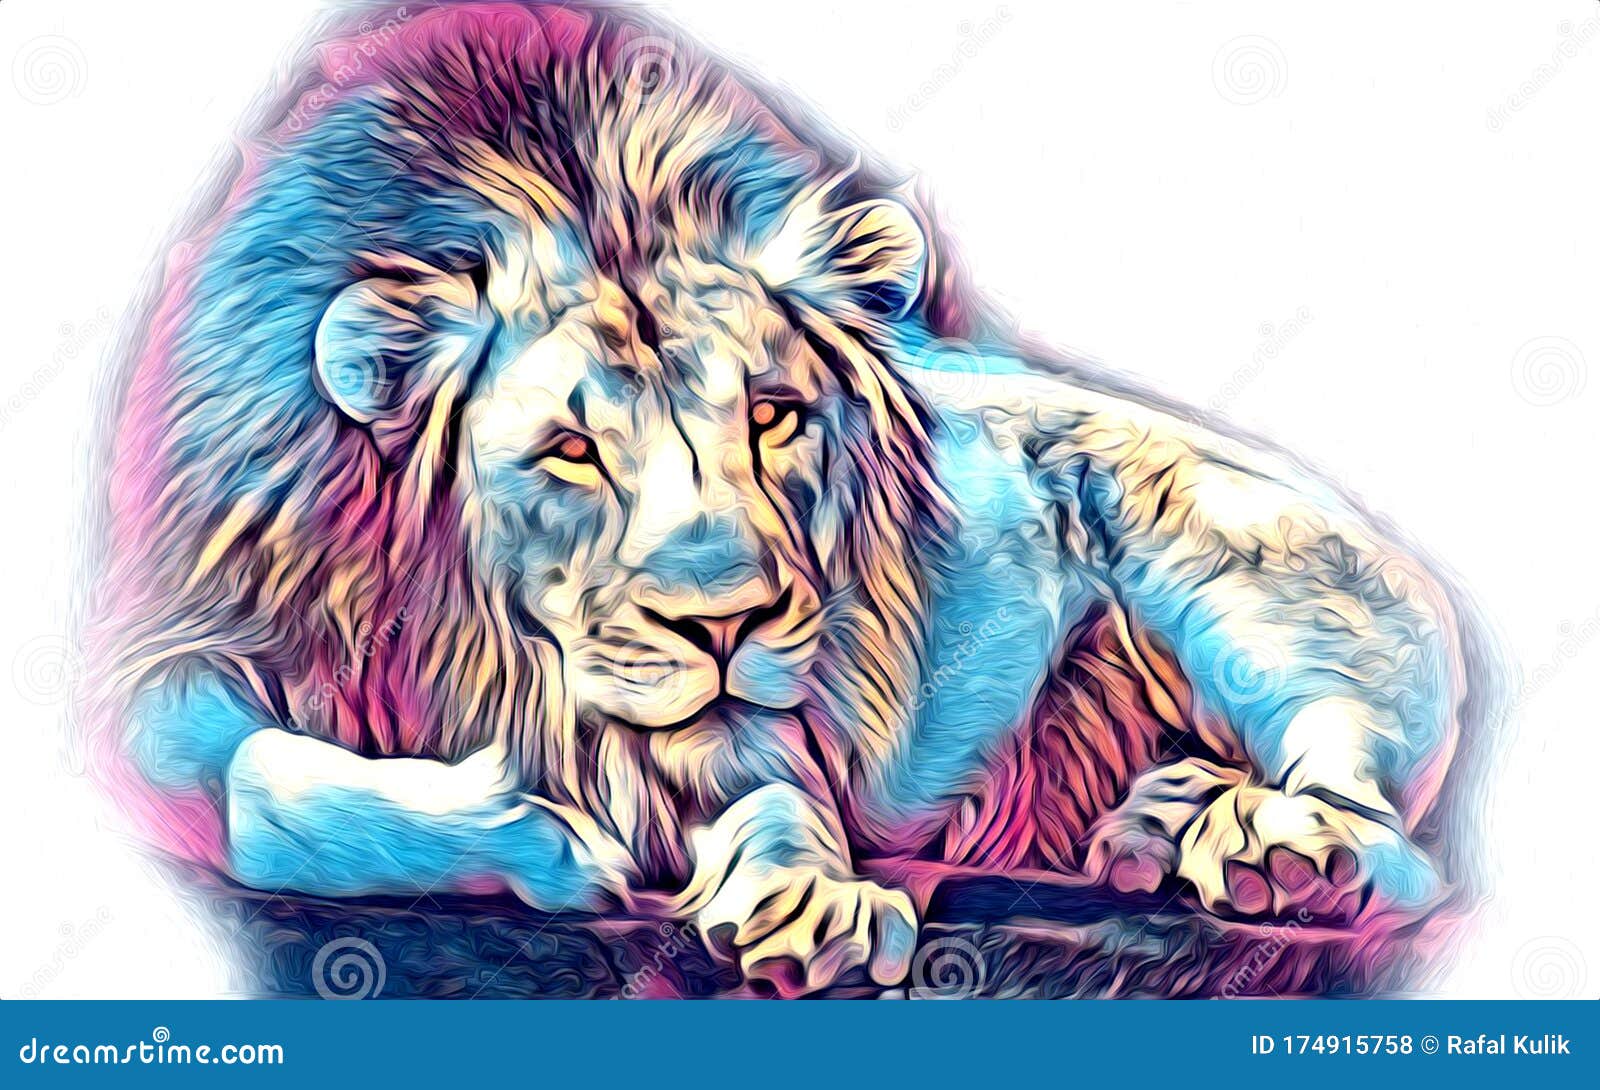 How to Draw a Lion Easy Step-By-Step Tutorial - Made with HAPPY